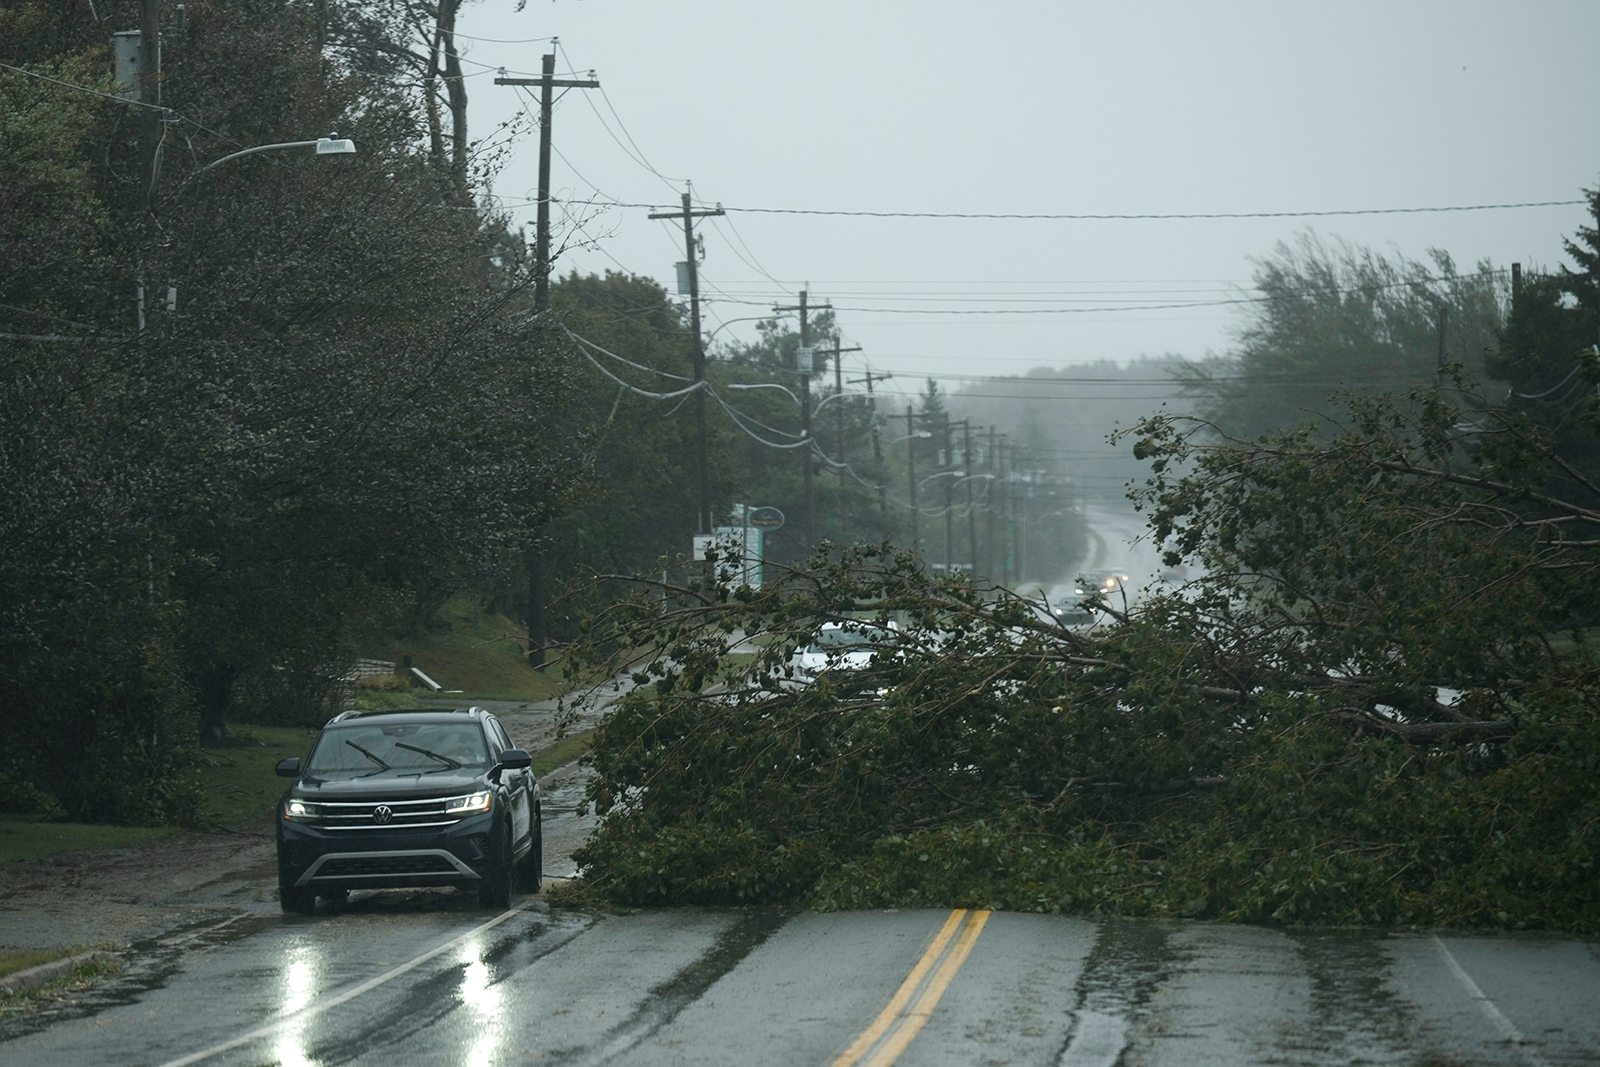 Vehicles navigate around a downed tree on Saturday, Sept. 24, in East Bay, Nova Scotia, on Cape Breton Island in Canada.